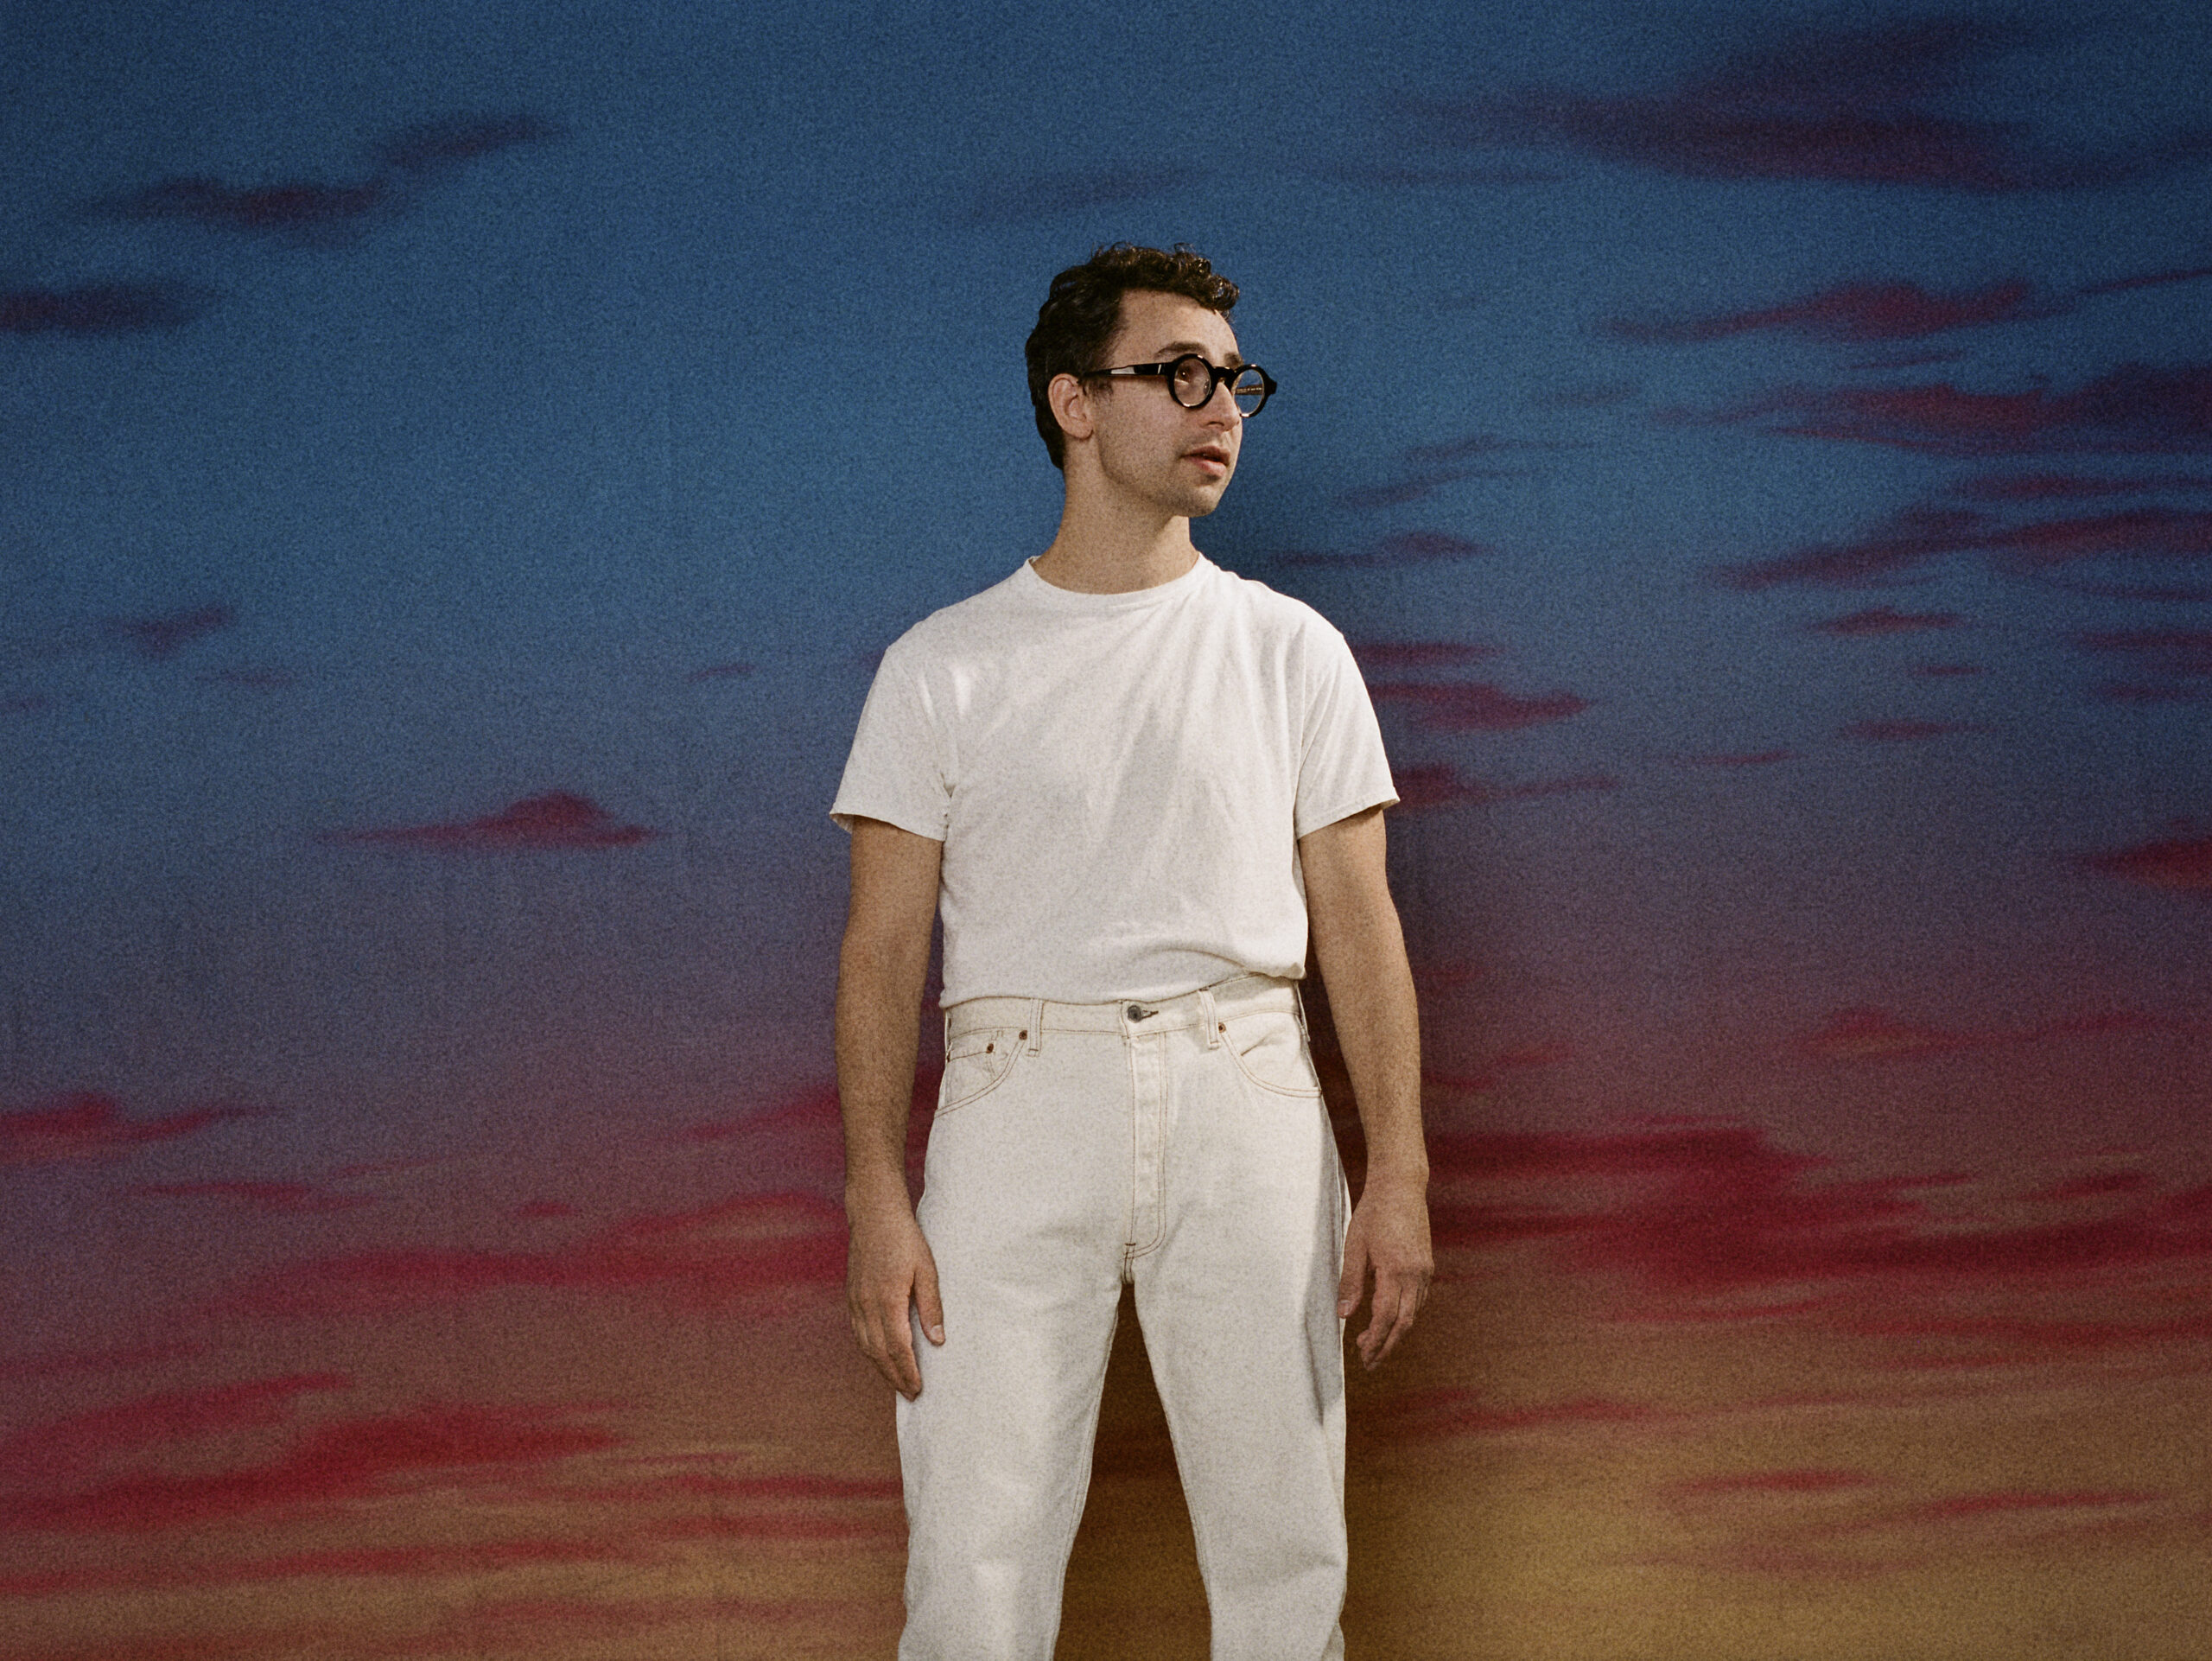 BLEACHERS – Take The Sadness Out Of Saturday Night